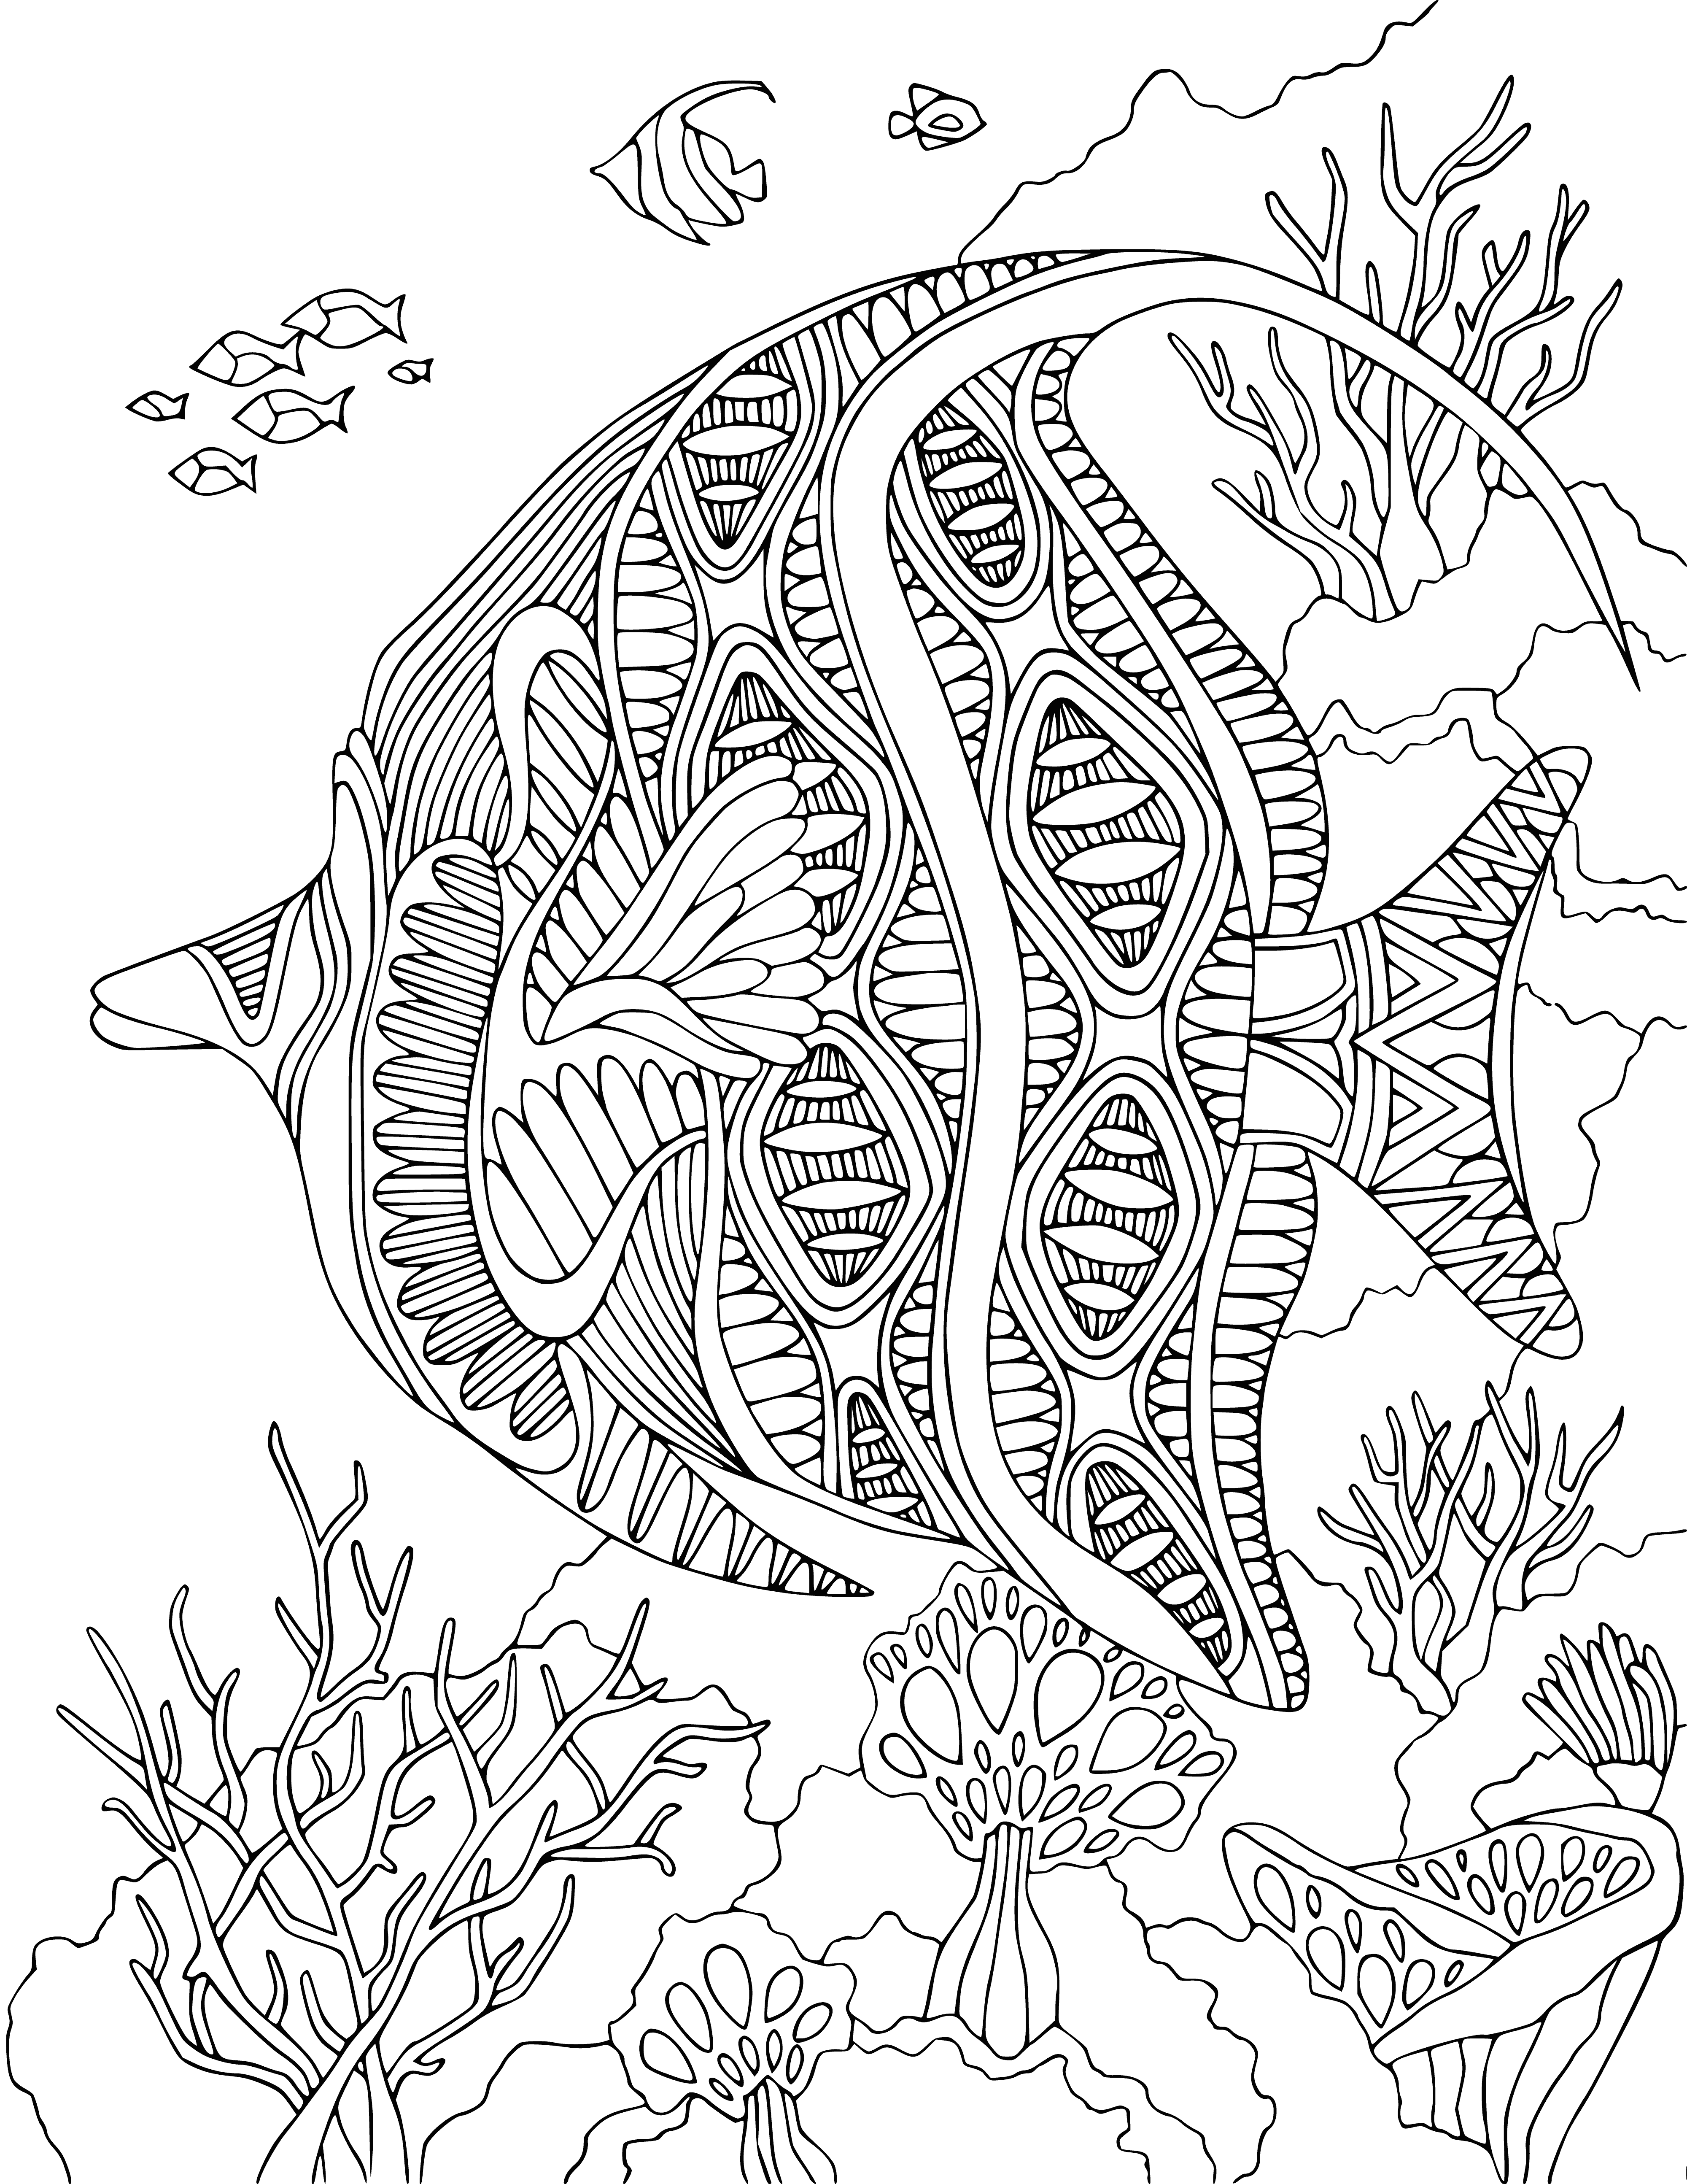 coloring page: Fish of all sizes & colors, plus other sea creatures! Color this page to de-stress & relax.